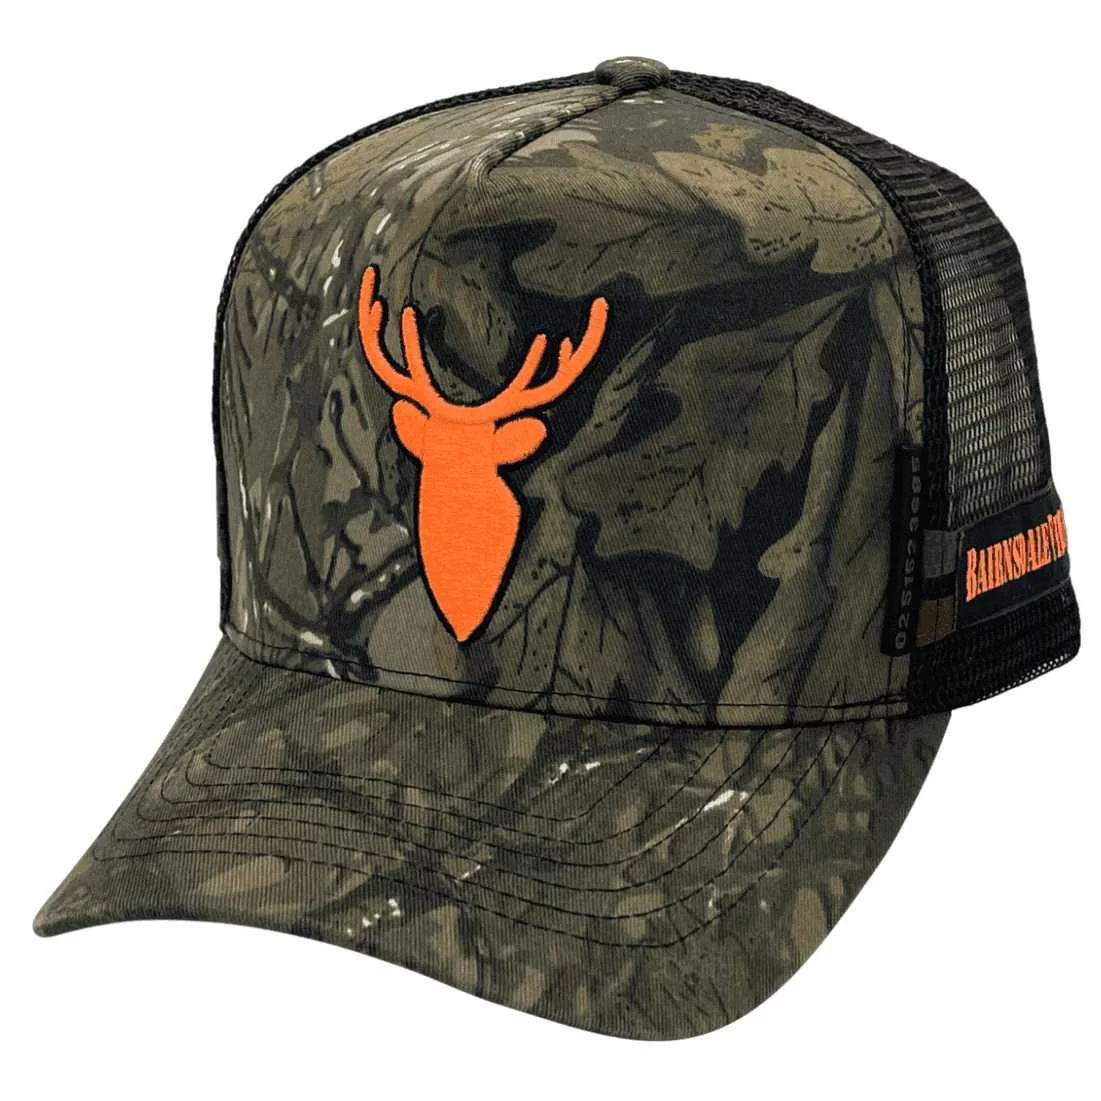 Bairnsdale Firearms and Accessories VIC HP Midrange Aussie Trucker Hat Camouflage with exclusive Australian Head Fit Crown